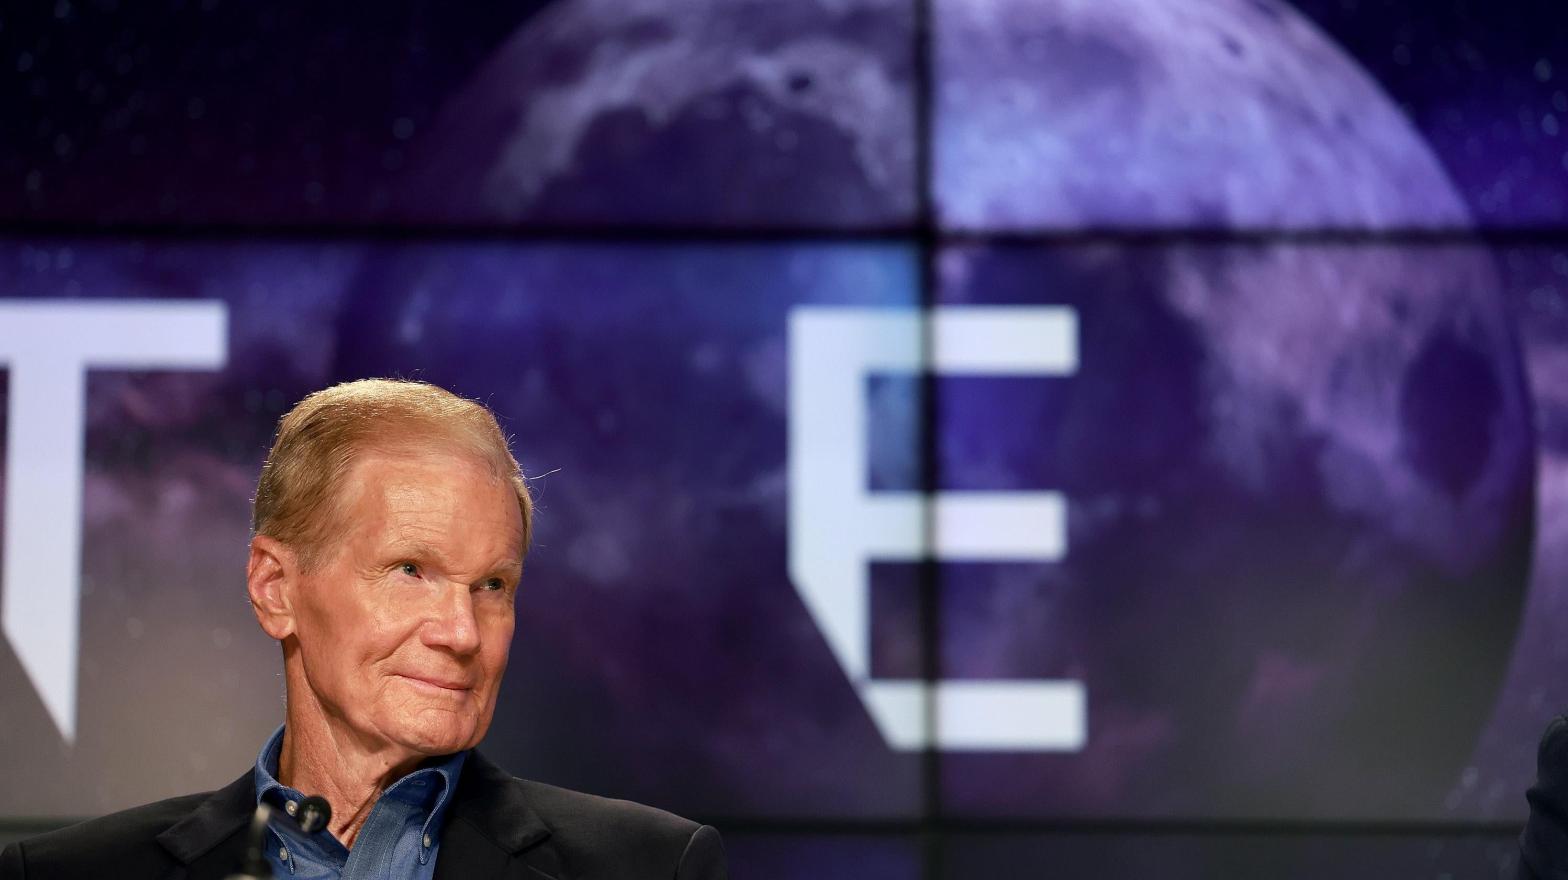 NASA Administrator Bill Nelson said he spoke to SpaceX CEO Gwynne Shotwell and was told not to worry about owner Elon Musk's politicization on Twitter. (Photo: Joe Raedle, Getty Images)